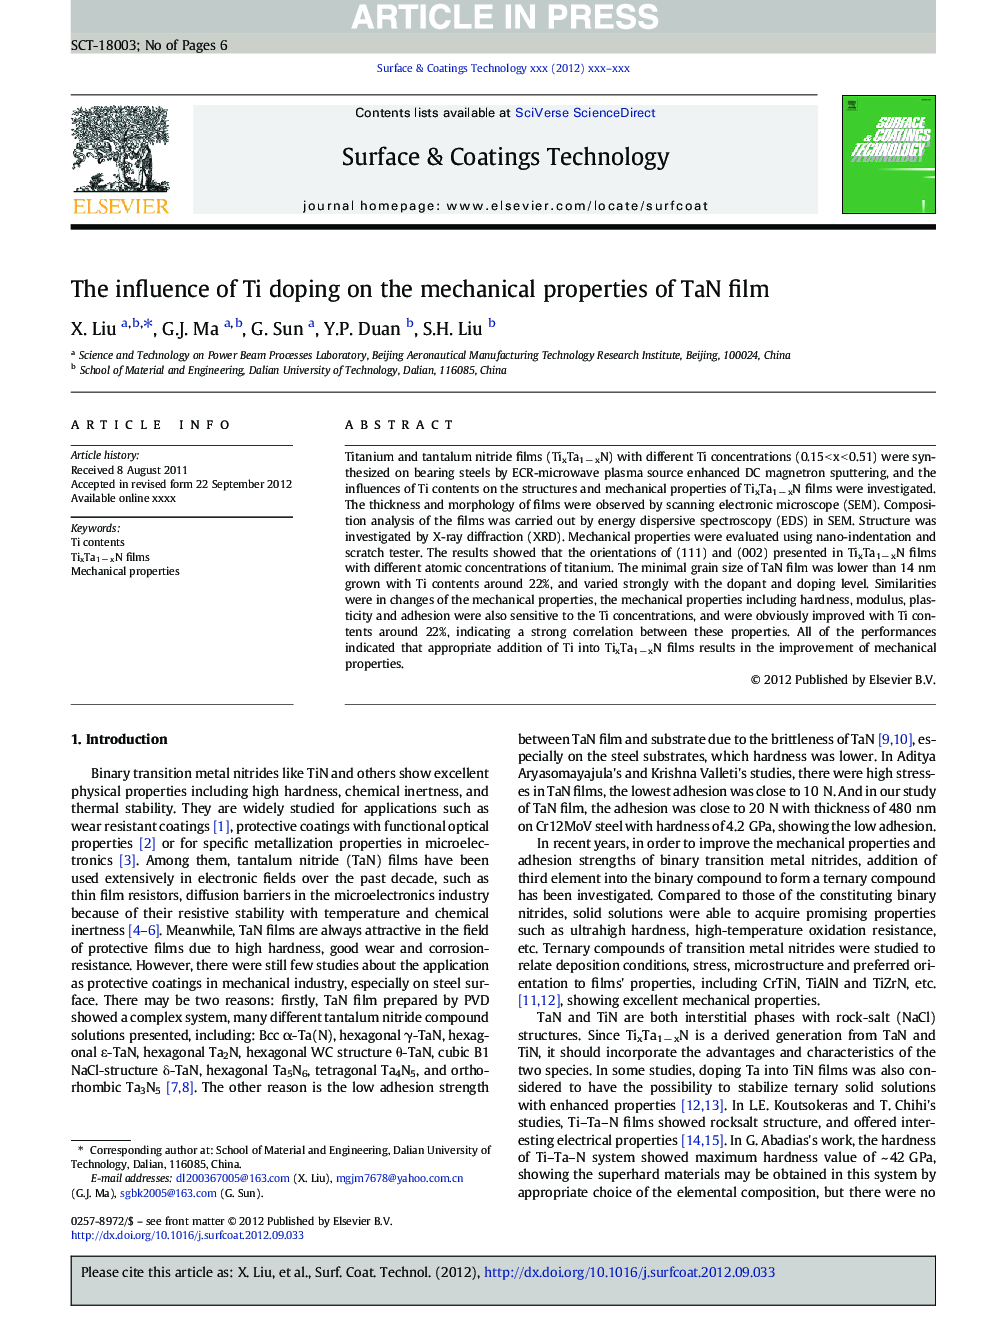 The influence of Ti doping on the mechanical properties of TaN film